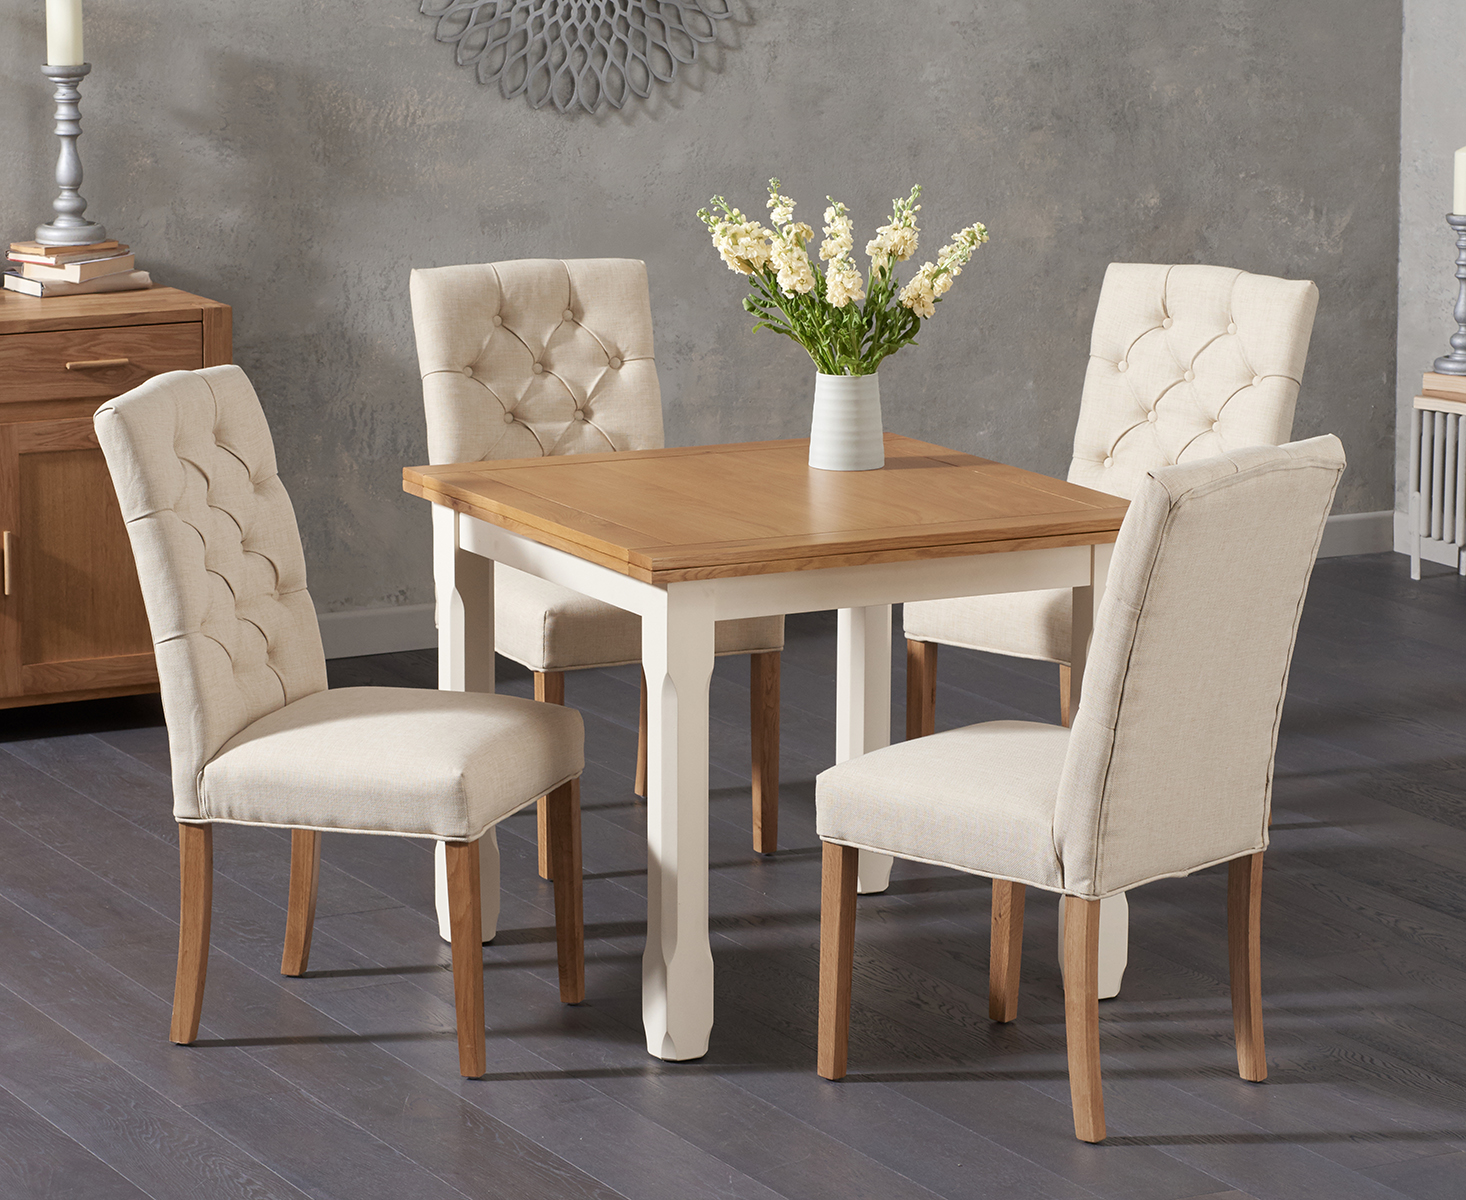 Somerset 90cm Flip Top Oak And Cream Painted Dining Table With 6 Cream Isabella Cream Fabric Chairs